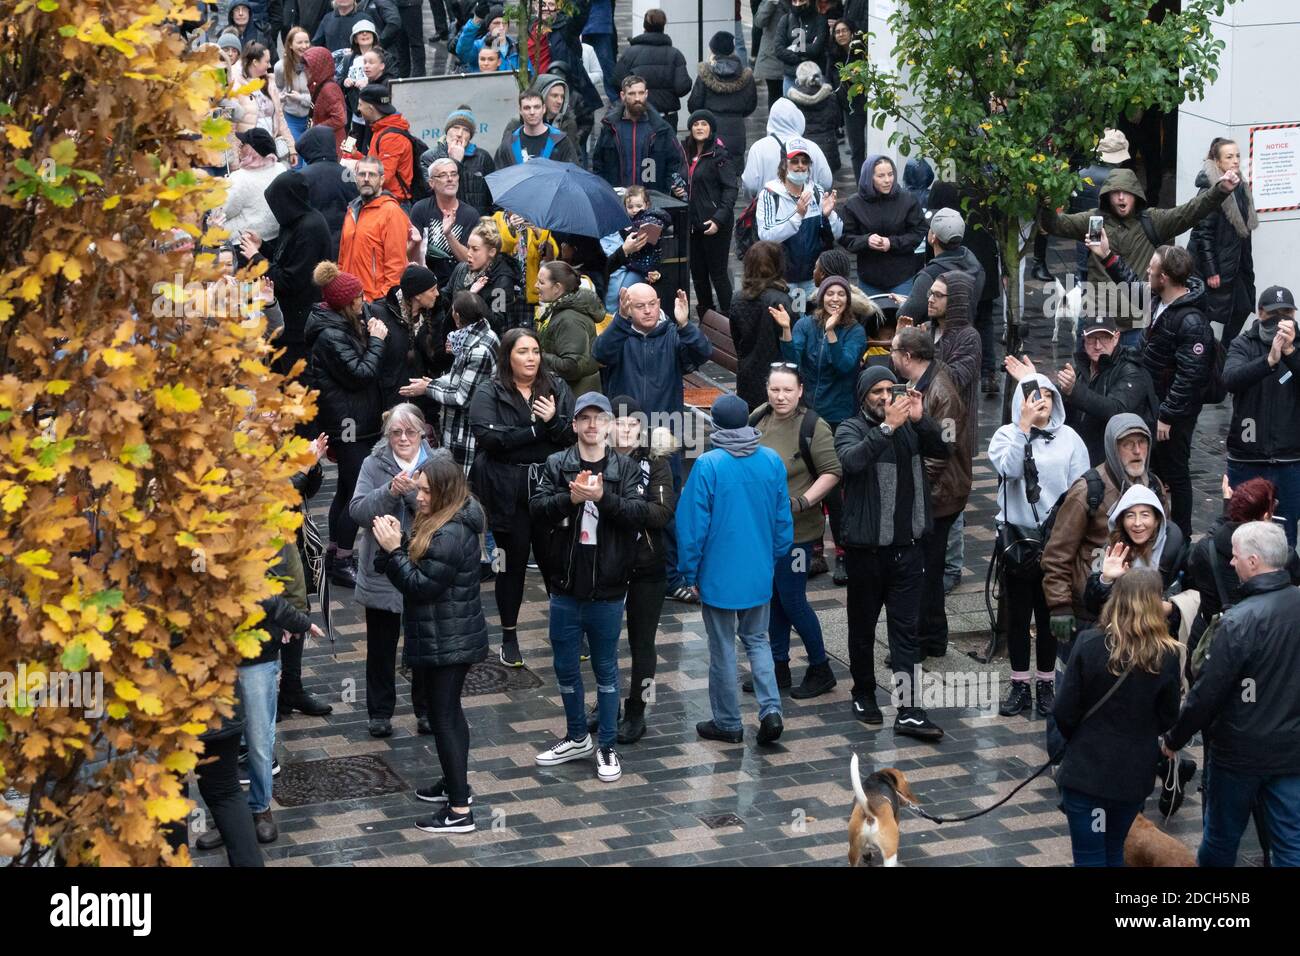 Liverpool, UK. 21st Nov 2020. Protesters gather in Liverpool City Centre and march through the streets to show their dissatisfaction with UK lockdown measures and government response to COVID-19. Tensions rise as protesters clash with police. Credit: Callum Fraser/Alamy Live News Stock Photo